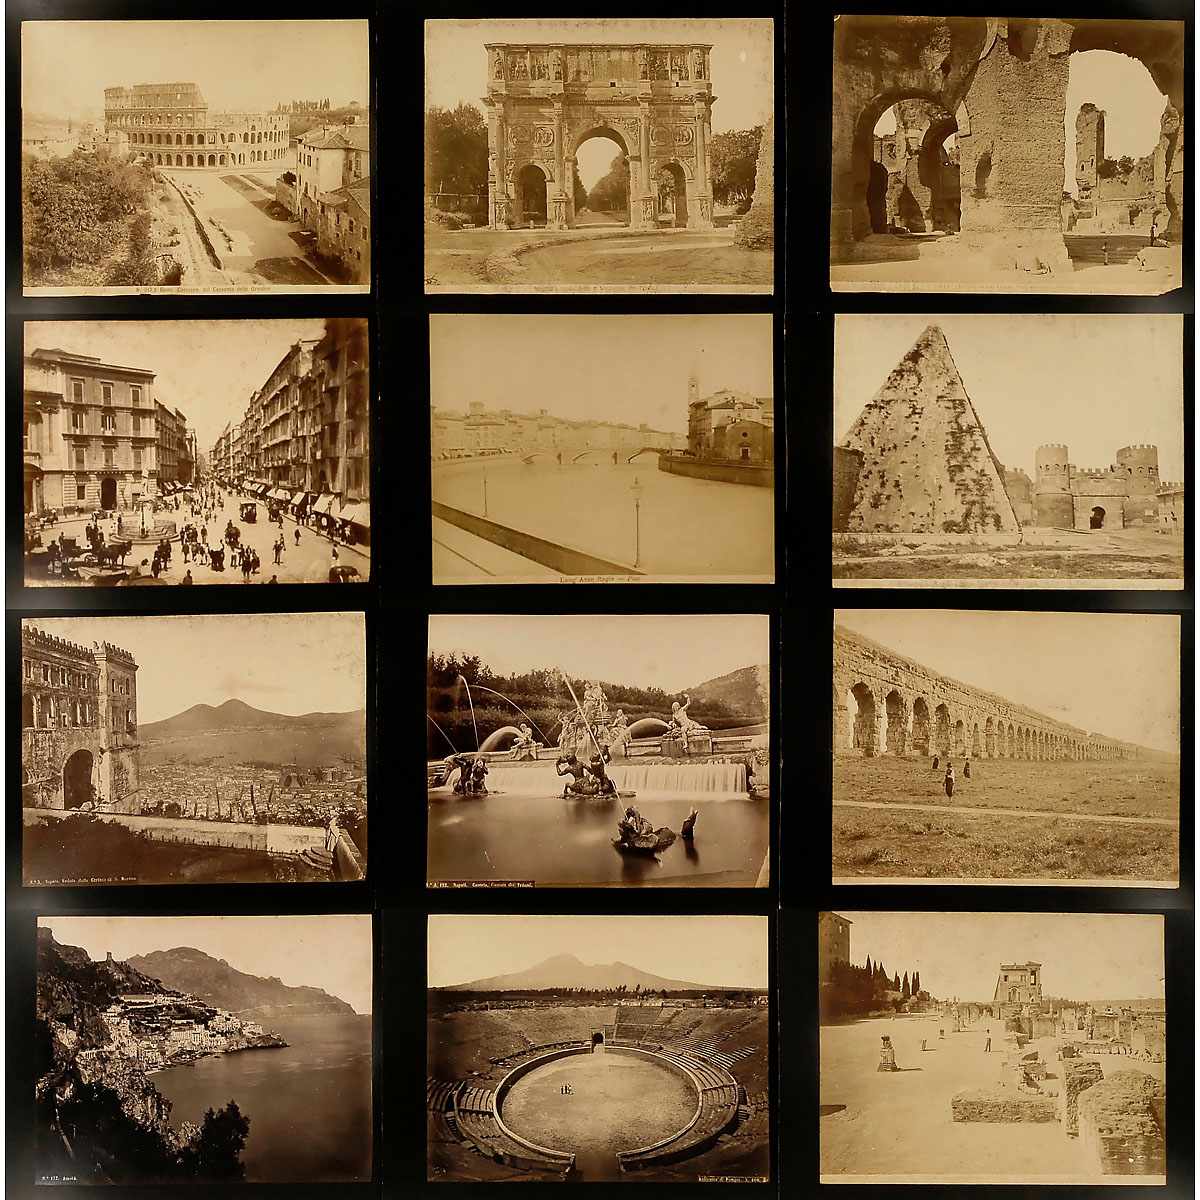 Approx. 160 Original Vintage Pictures for Viewer, c. 1880-1900 External dimension 9 ½ x 13 in., - Image 3 of 6